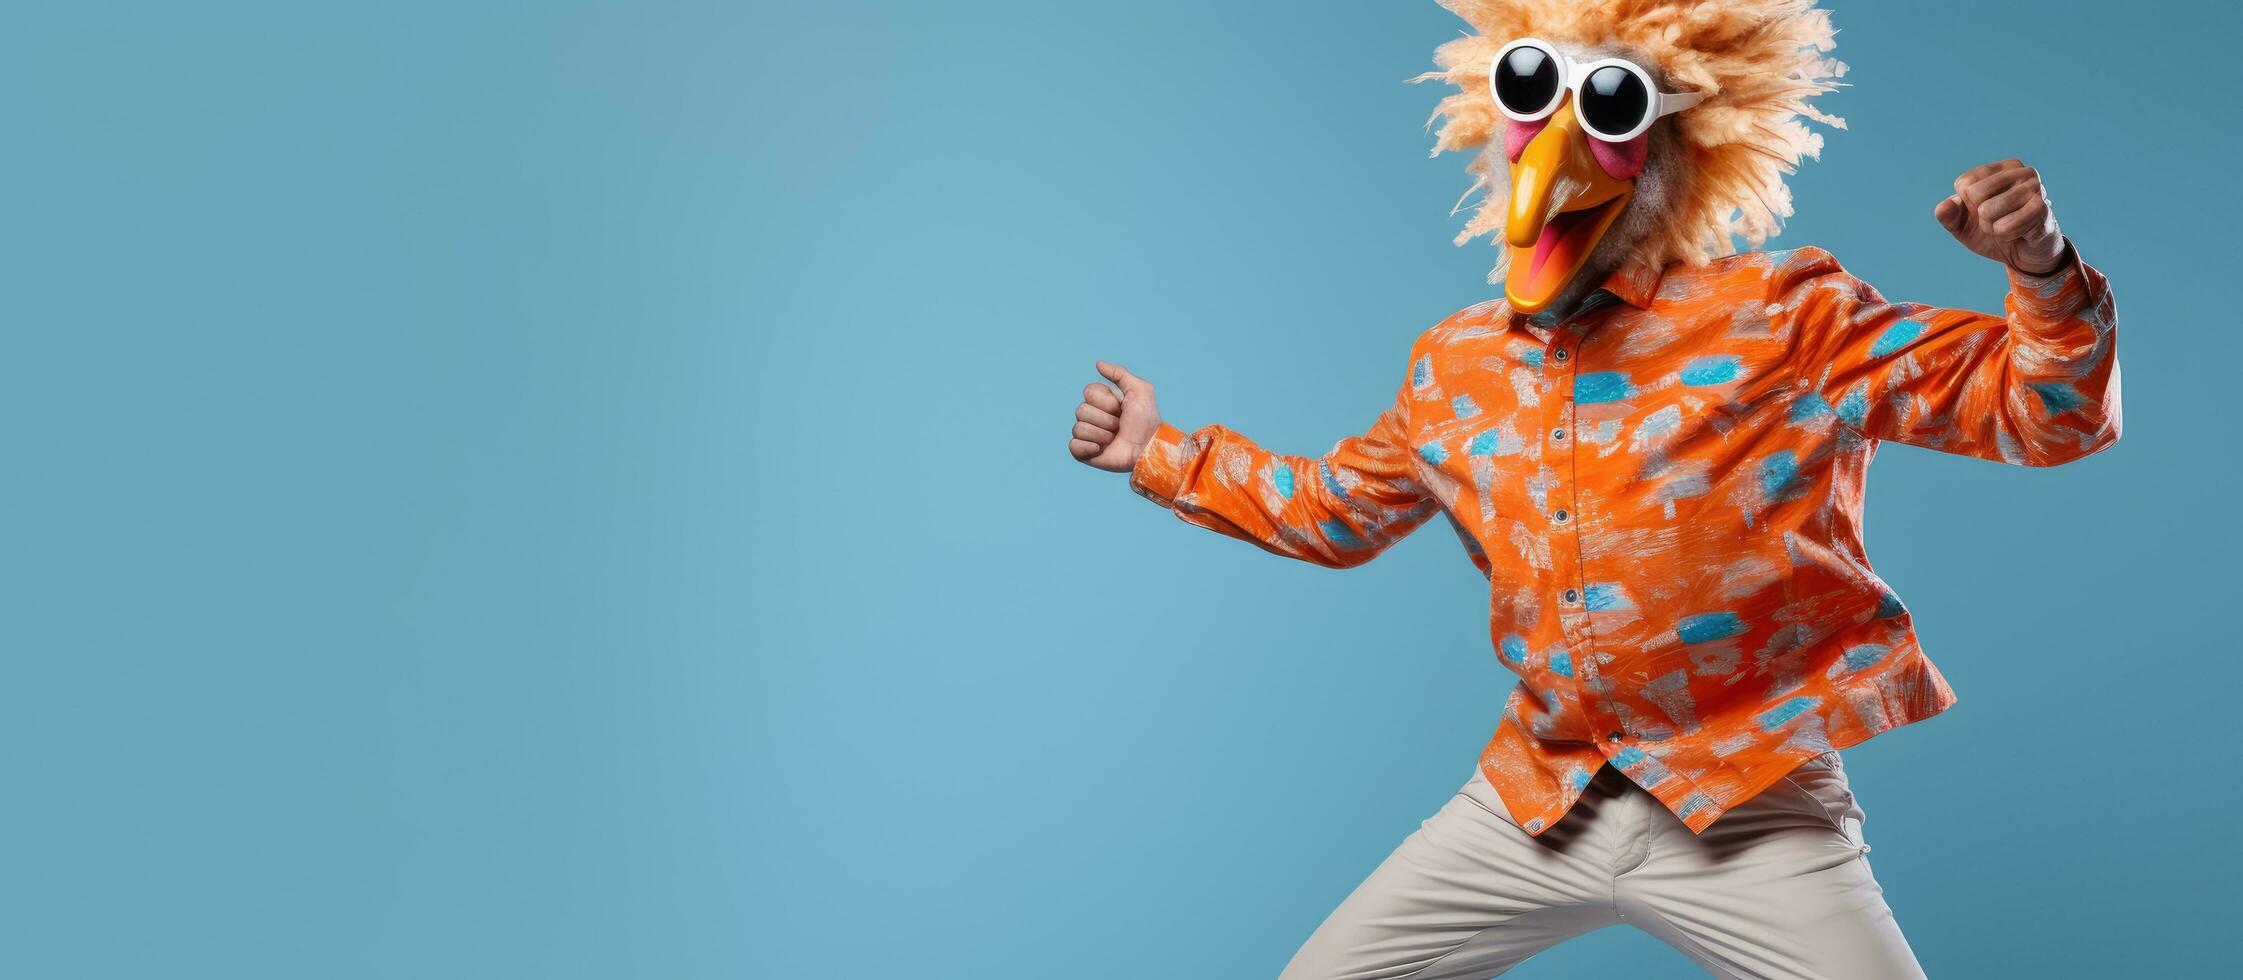 Eccentric man in orange shirt and casual pants having fun in funny chicken head mask dancing like a robot on light blue background photo